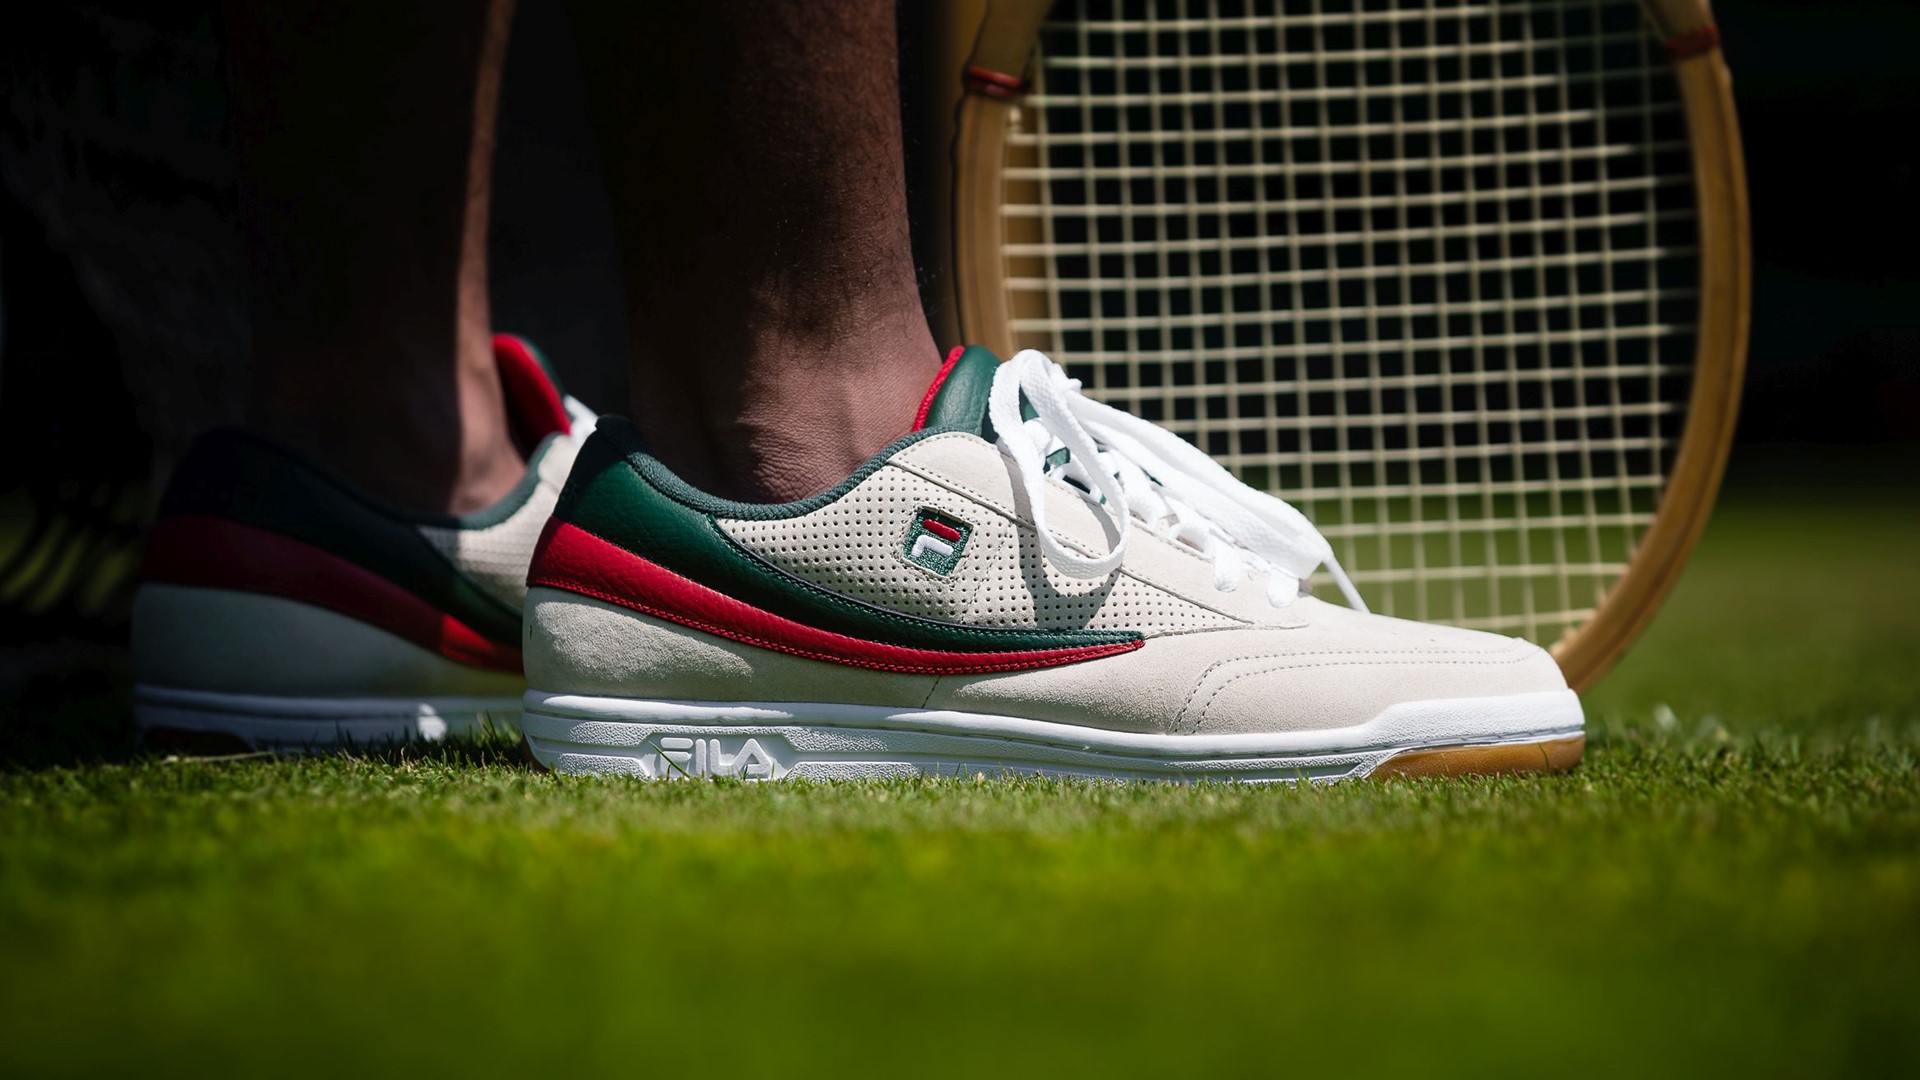 FILA and Packer Kick Off Limited−Edition Sneaker Collaboration with International Tennis Hall of